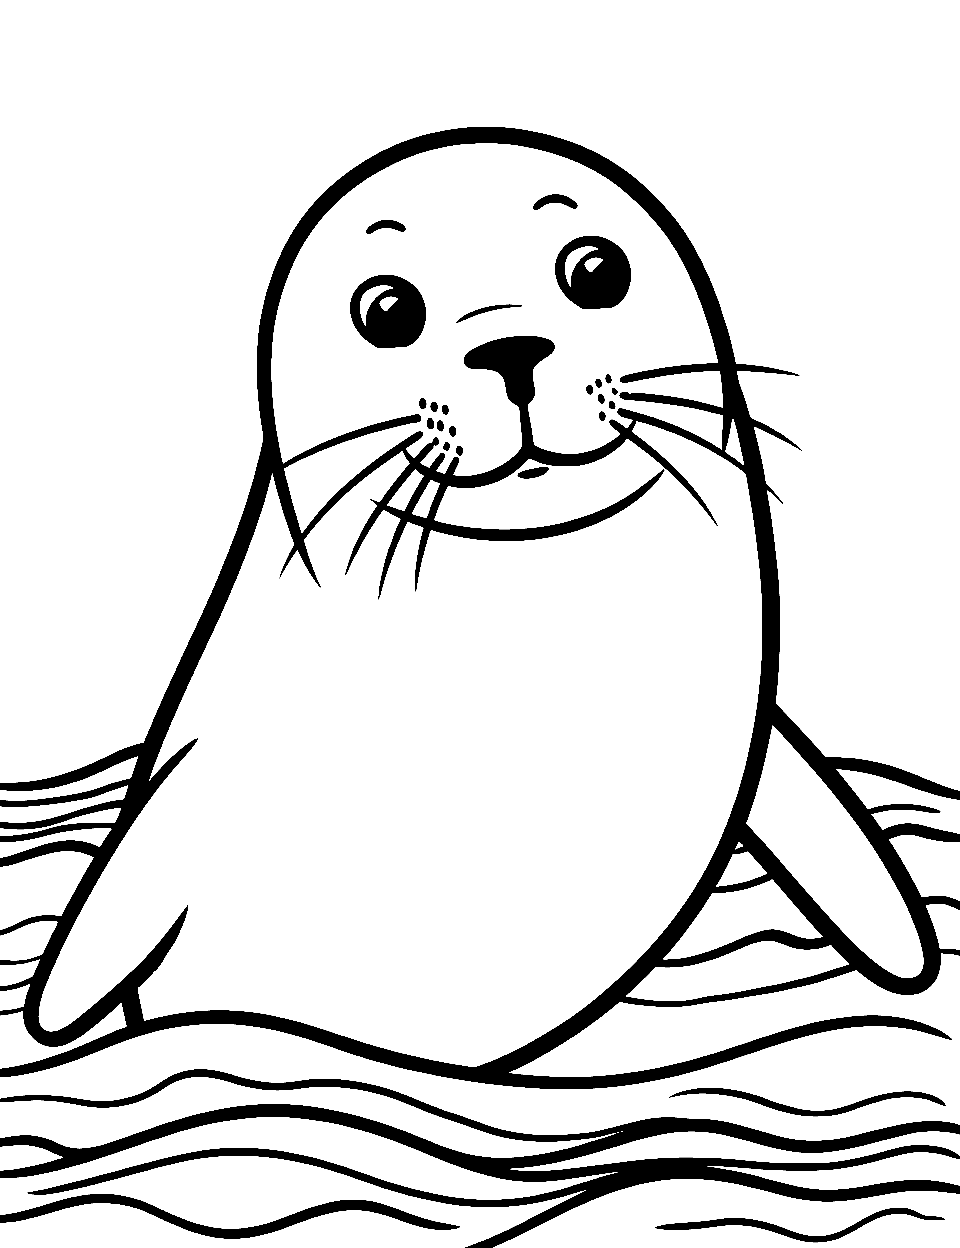 Seal Popping Out of Water Ocean Coloring Page - A cute coloring page of a seal poking its head out of the ocean.